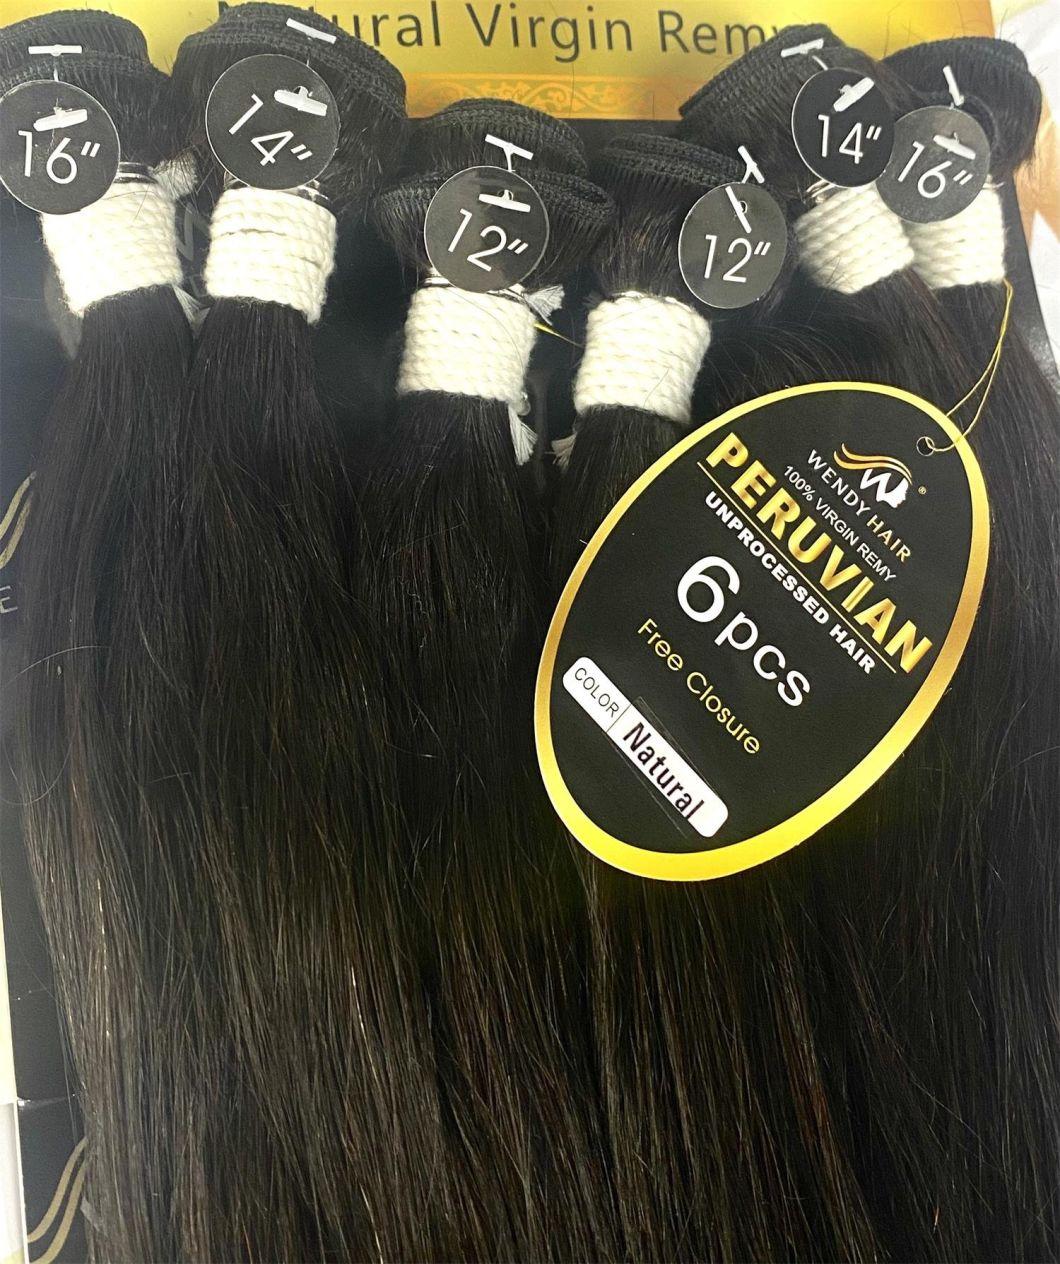 New Arrival Big Package Cheap Human Hair Weave 6 in 1 Pack Brazilian Straight Remy Hair Bundles for Sale All in One